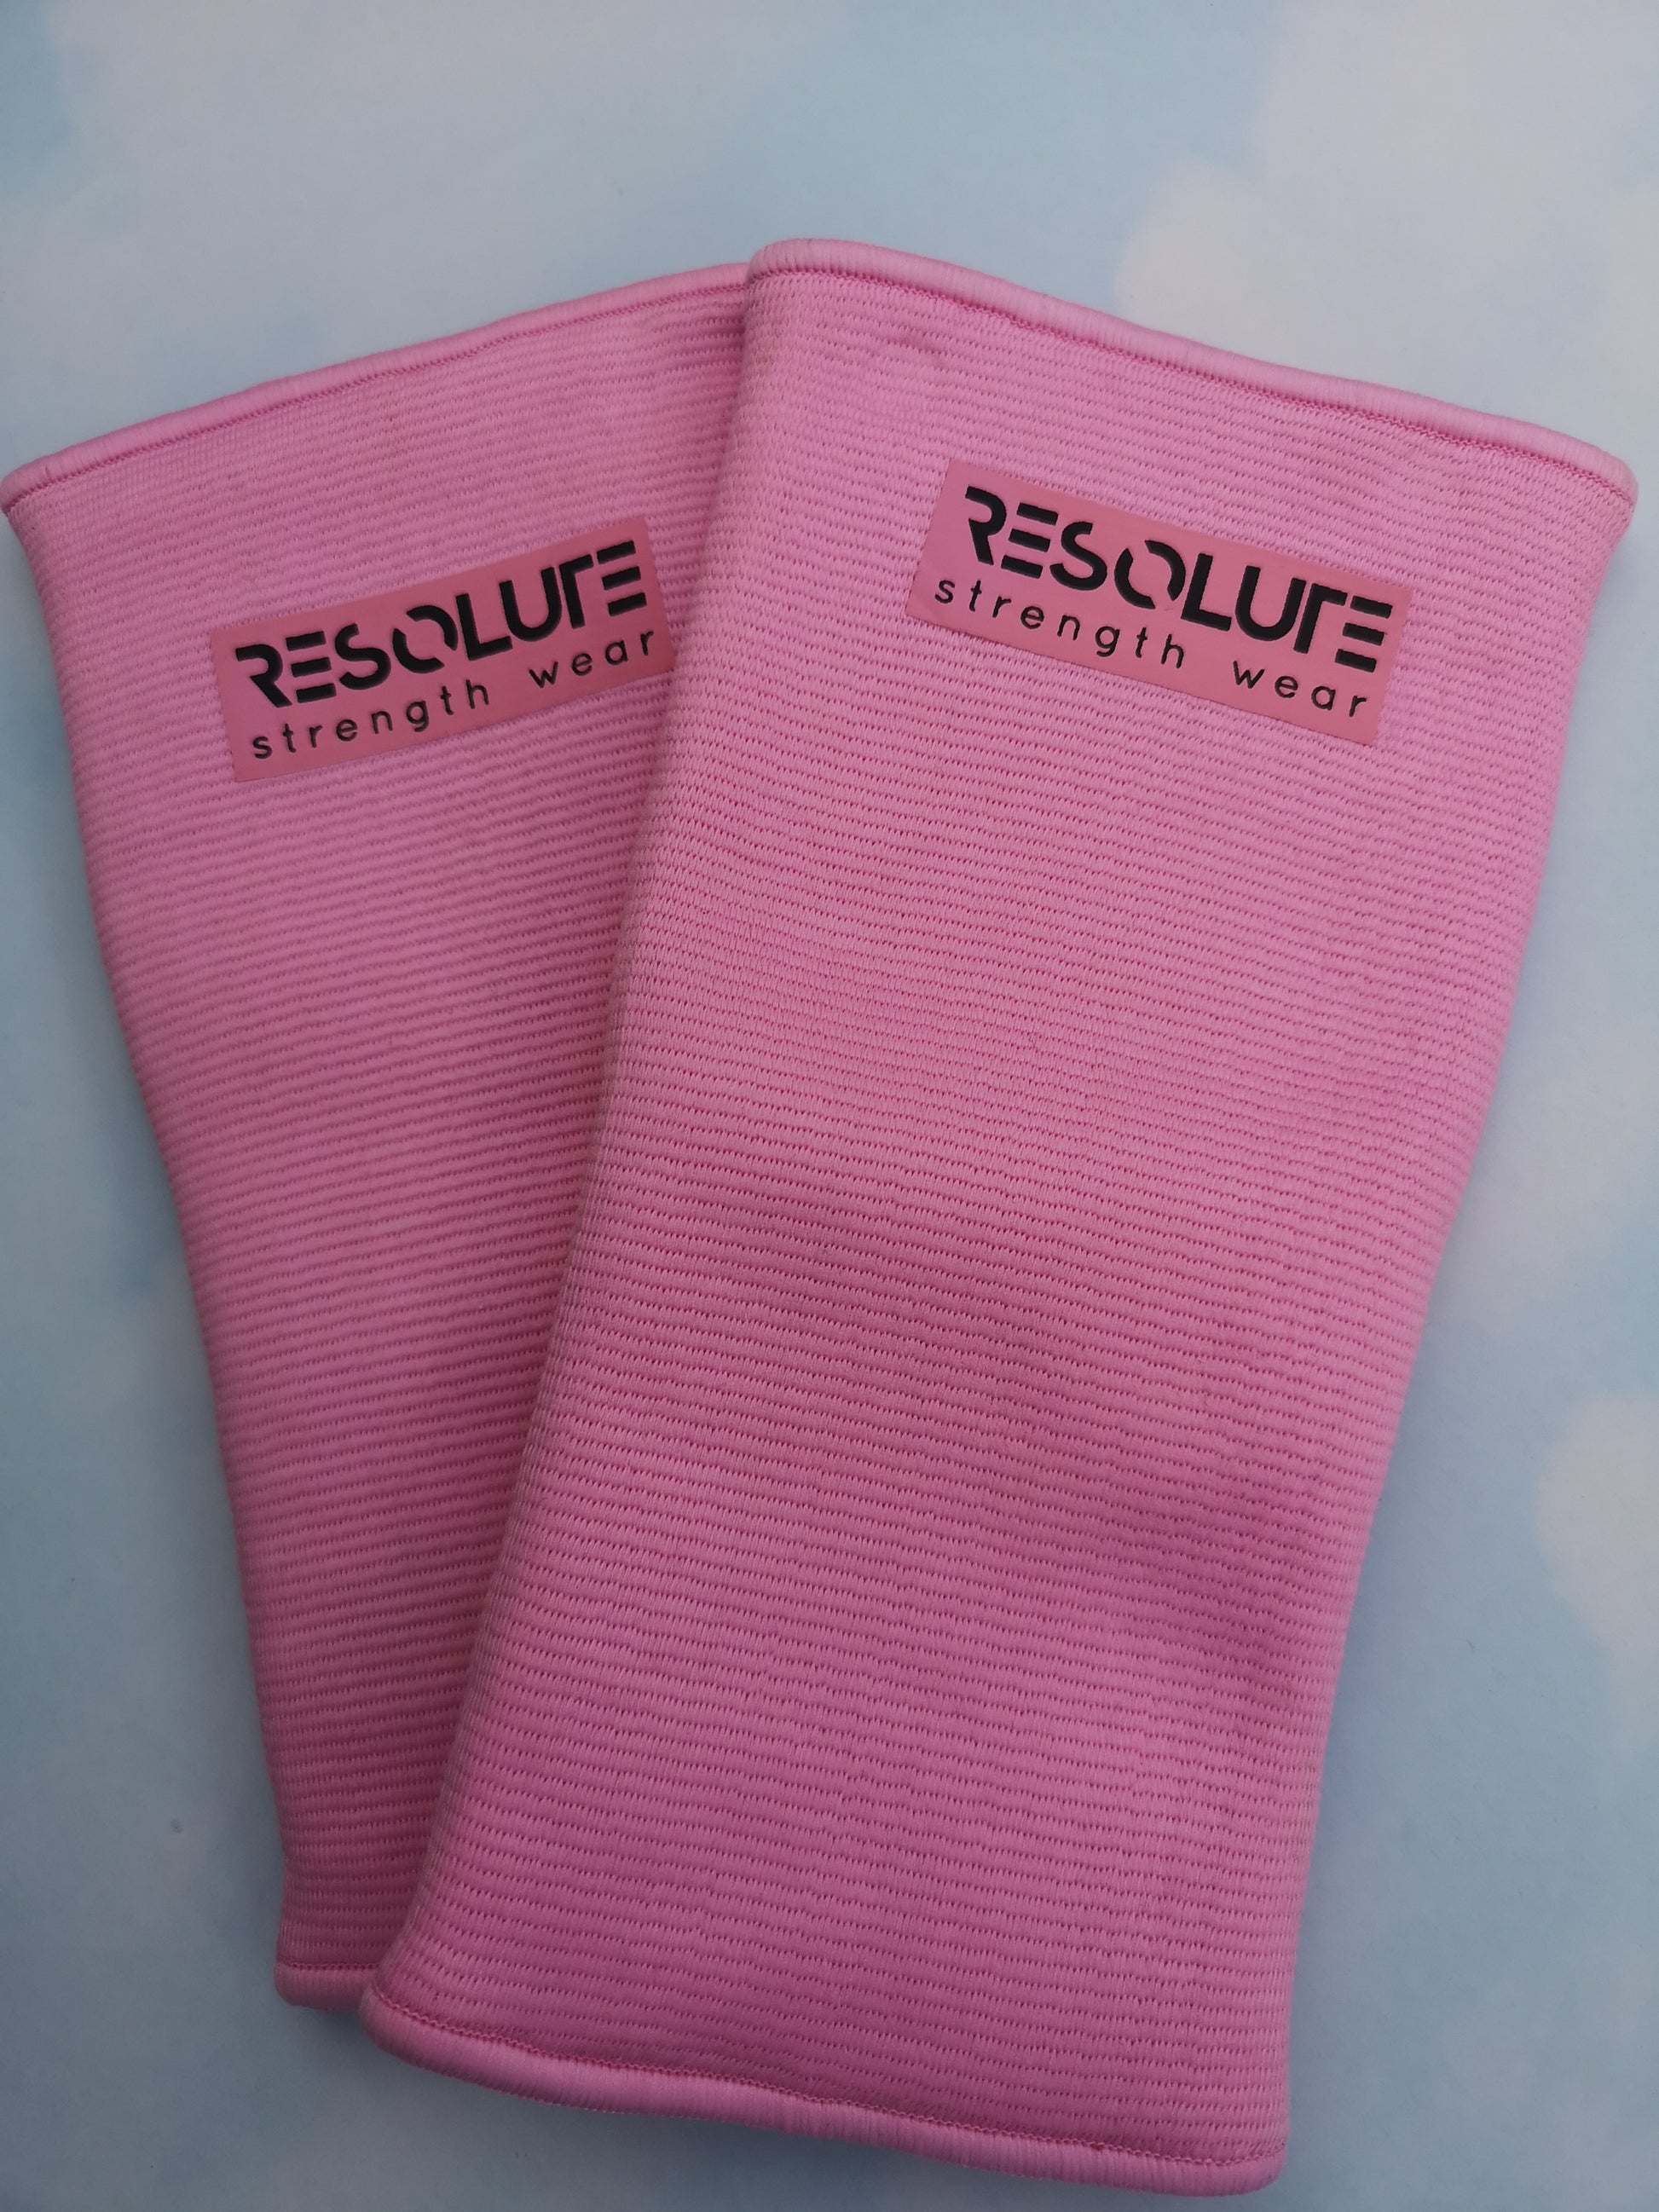 Baby Pink Elbow Sleeves - DOUBLE PLY - Resolute Strength Wear